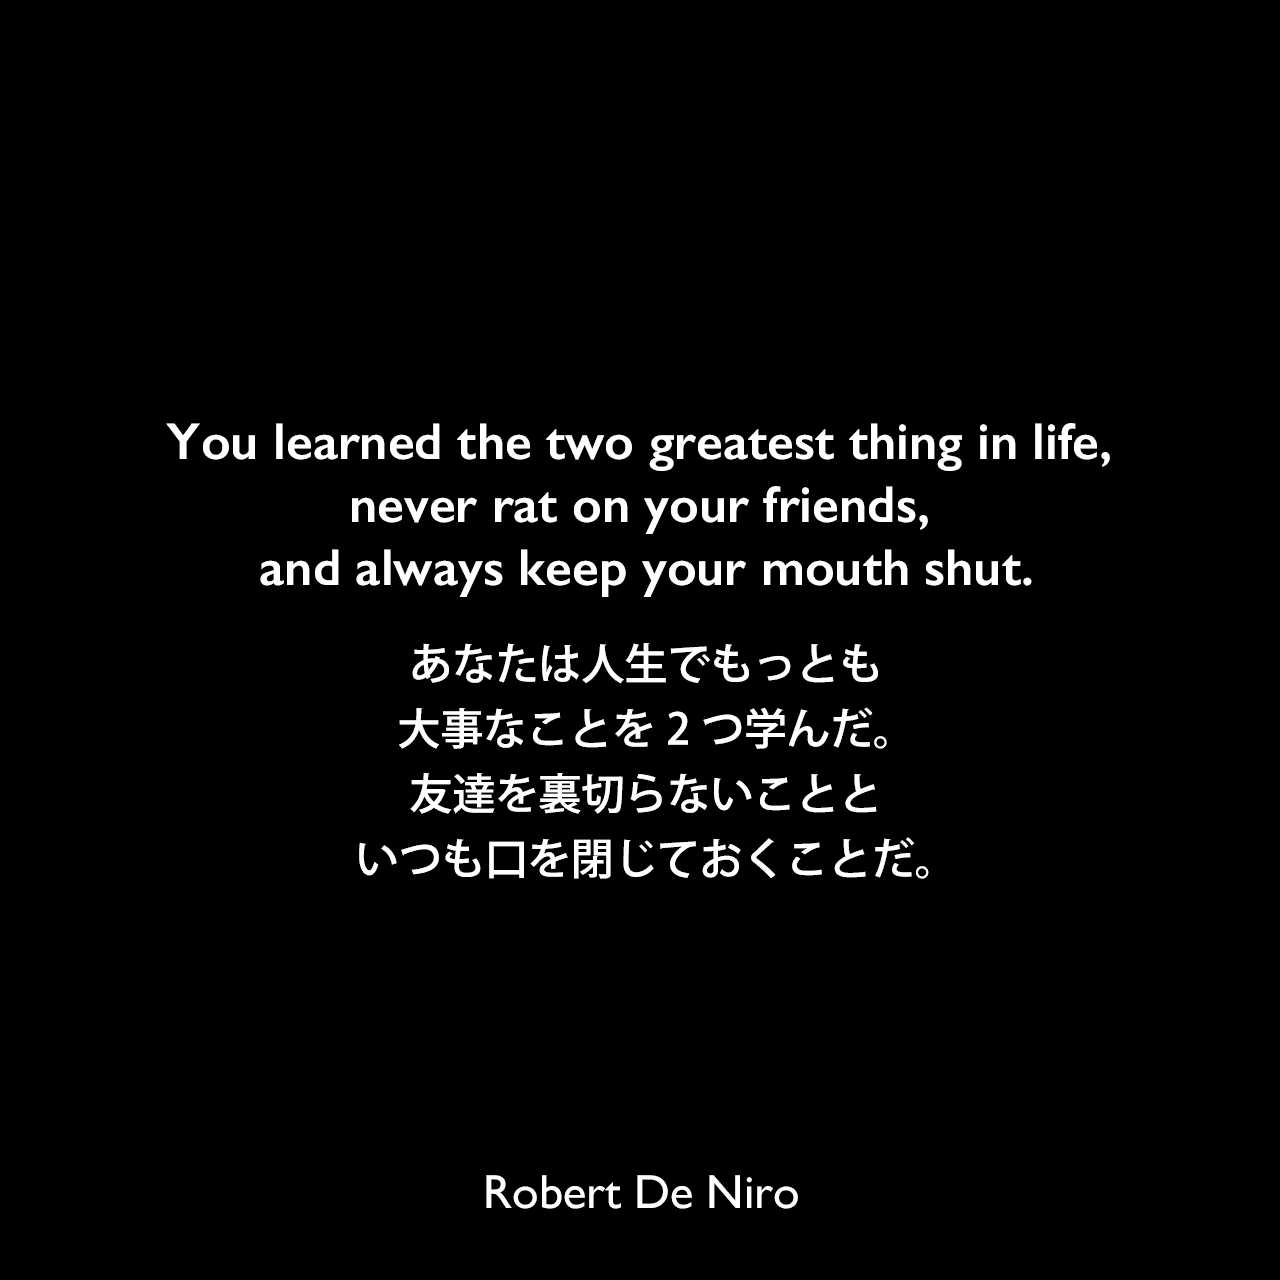 You learned the two greatest thing in life, never rat on your friends, and always keep your mouth shut.あなたは人生でもっとも大事なことを2つ学んだ。友達を裏切らないことといつも口を閉じておくことだ。Robert De Niro